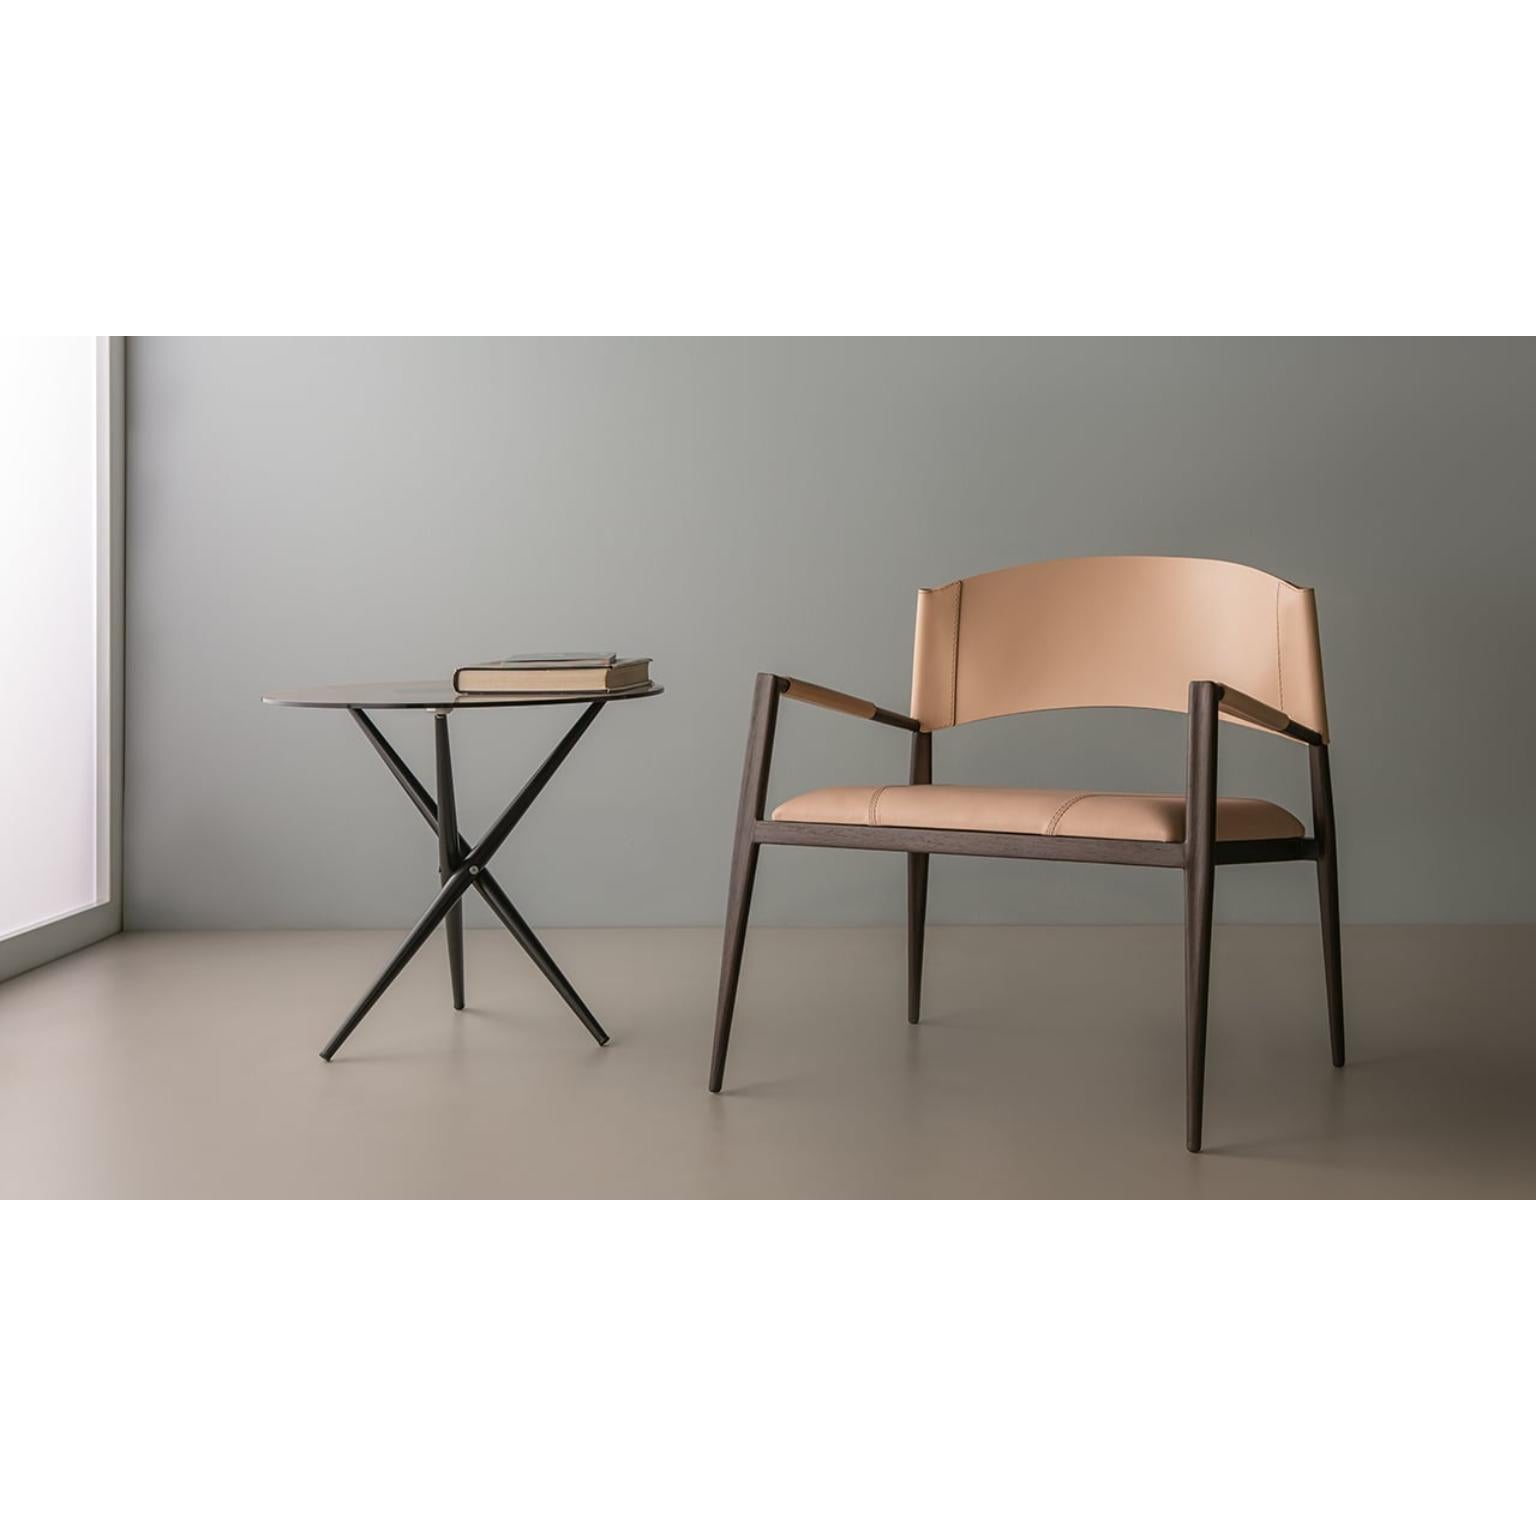 Ale Lounge Chair by Doimo Brasil
Dimensions: W 72 x D 65 x H 73 cm 
Materials: Natural leather, Soleta, Veneer.


With the intention of providing good taste and personality, Doimo deciphers trends and follows the evolution of man and his space. To